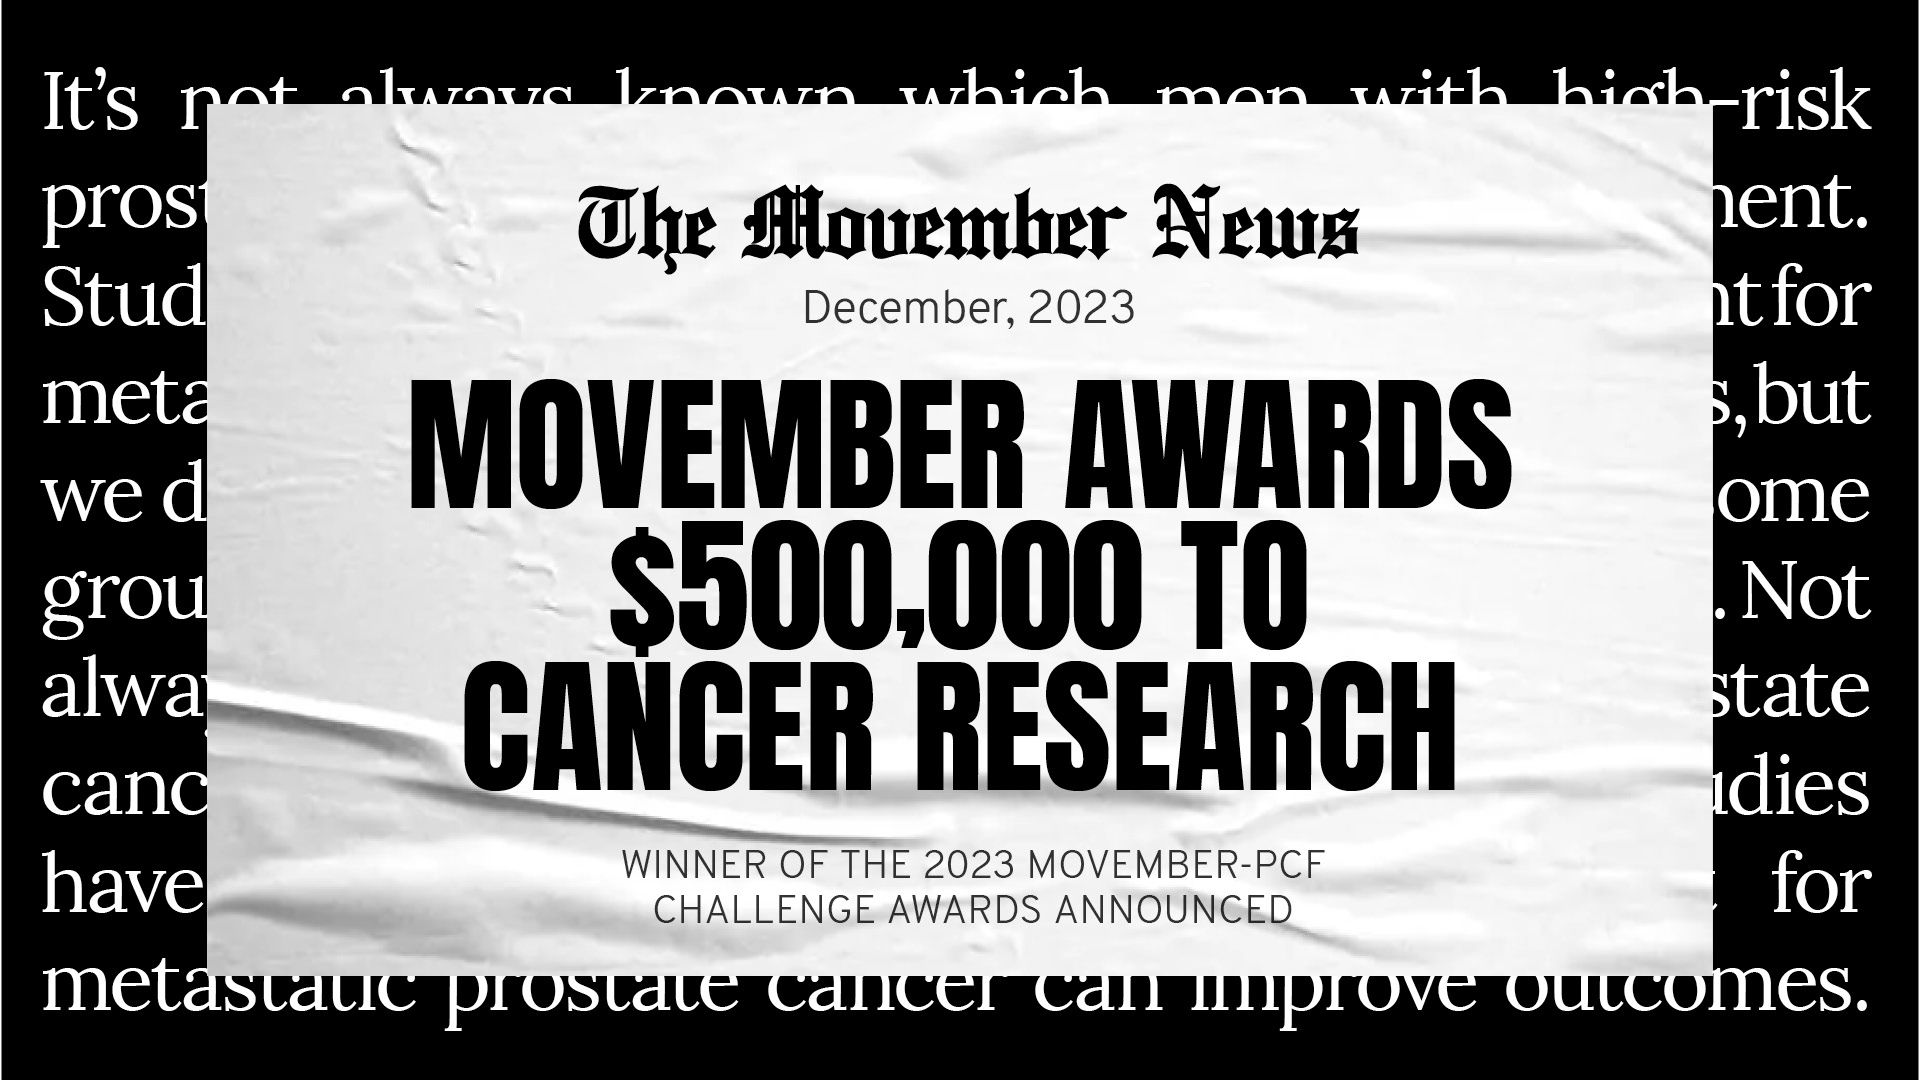 "Movember news: Movember awards $500,000 to cancer research. Winner of the 2023 Movember-PCF Challenge Awards announced"